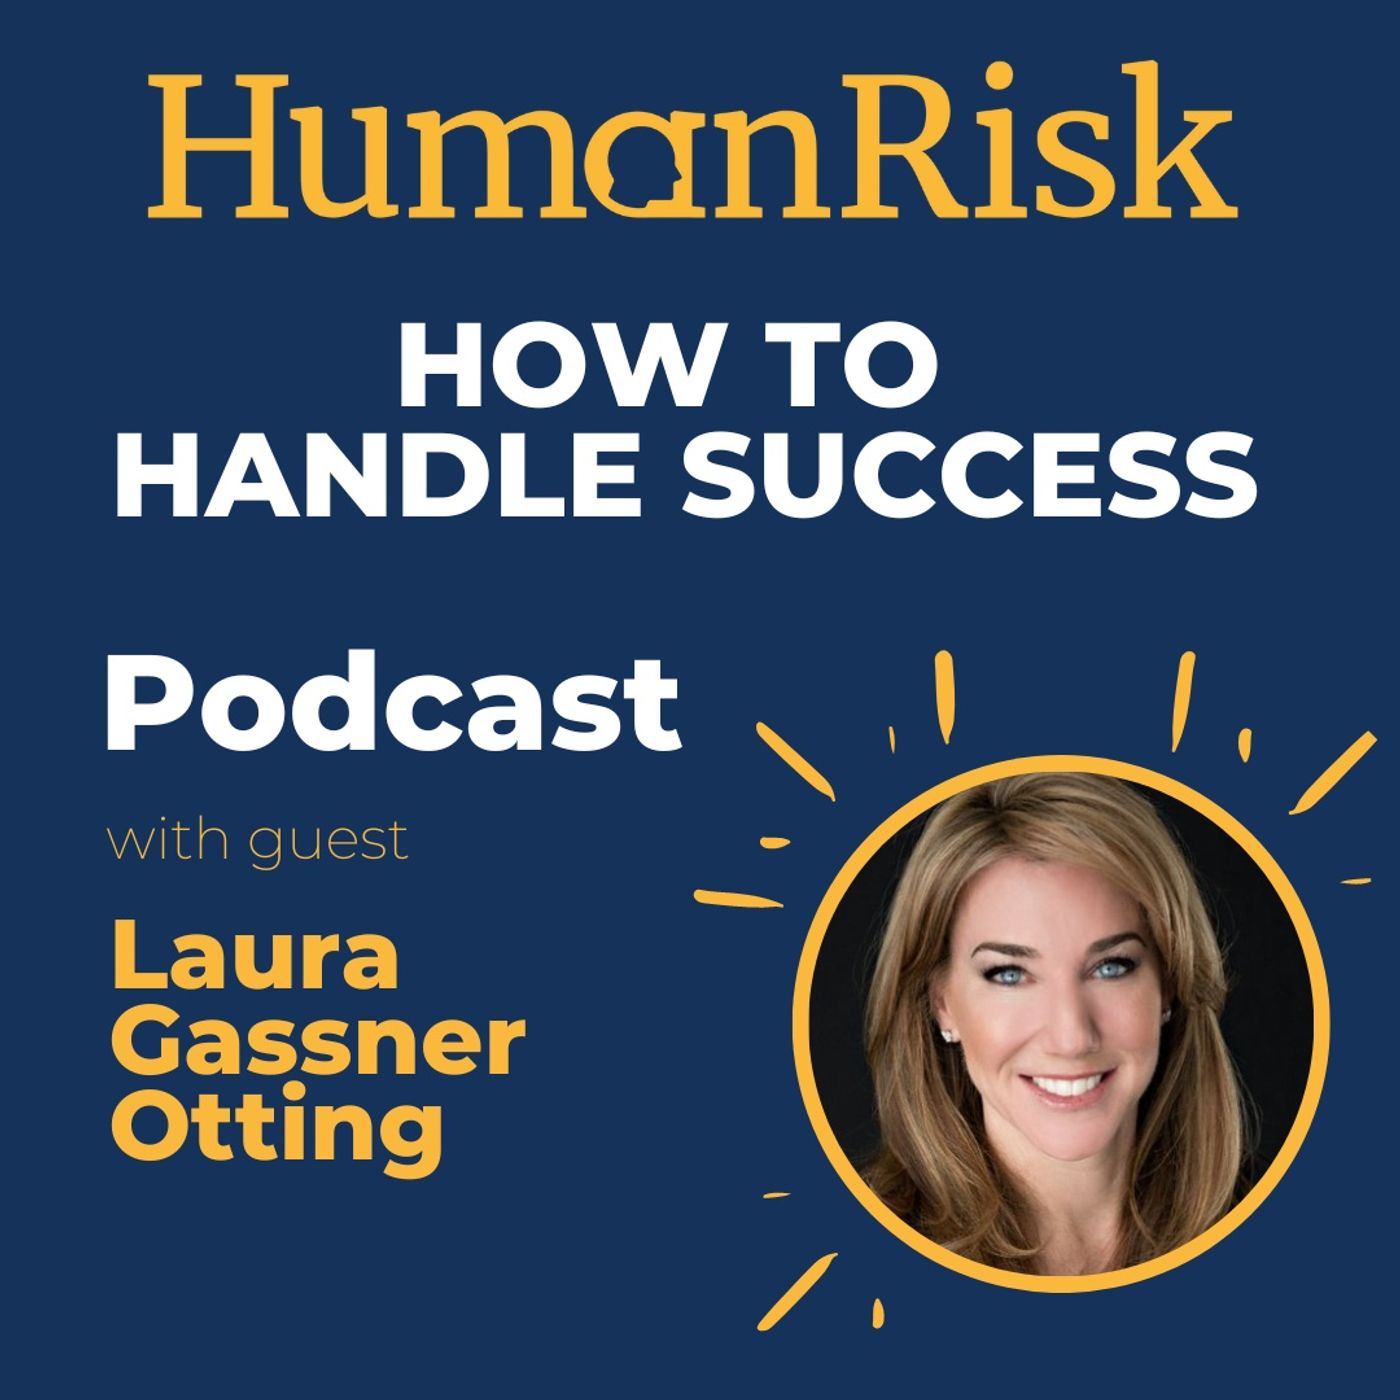 Laura Gassner Otting on how to handle success Image